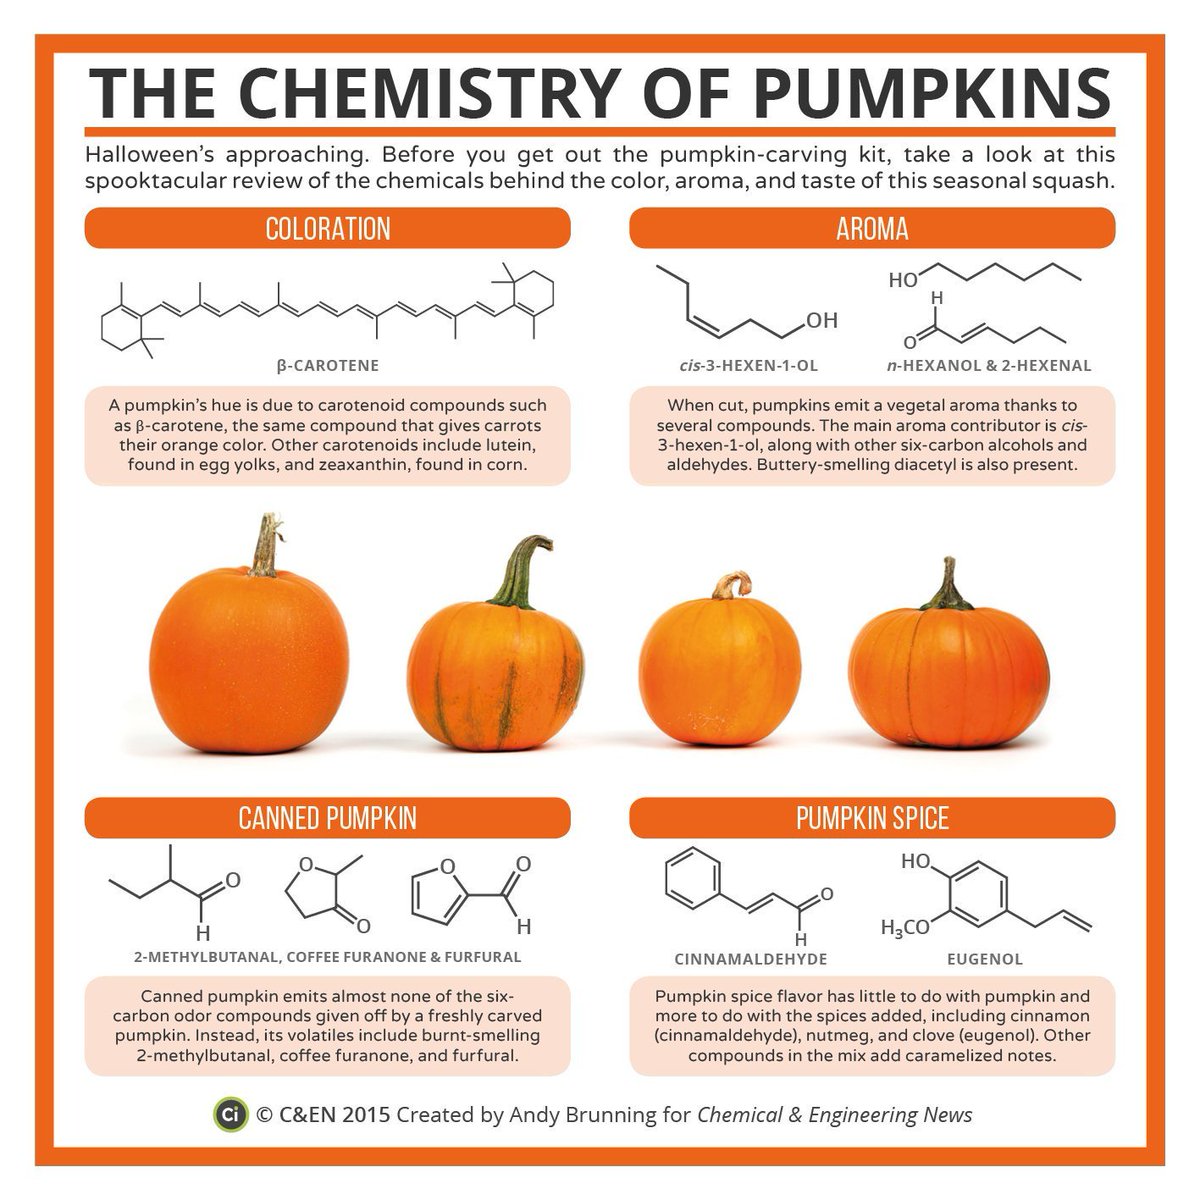 It's #NationalPumpkinDay! While you get carving for Halloween, here's the chemistry behind their orange colour and vegetal smell in @cenmag: cen.acs.org/articles/93/i4…